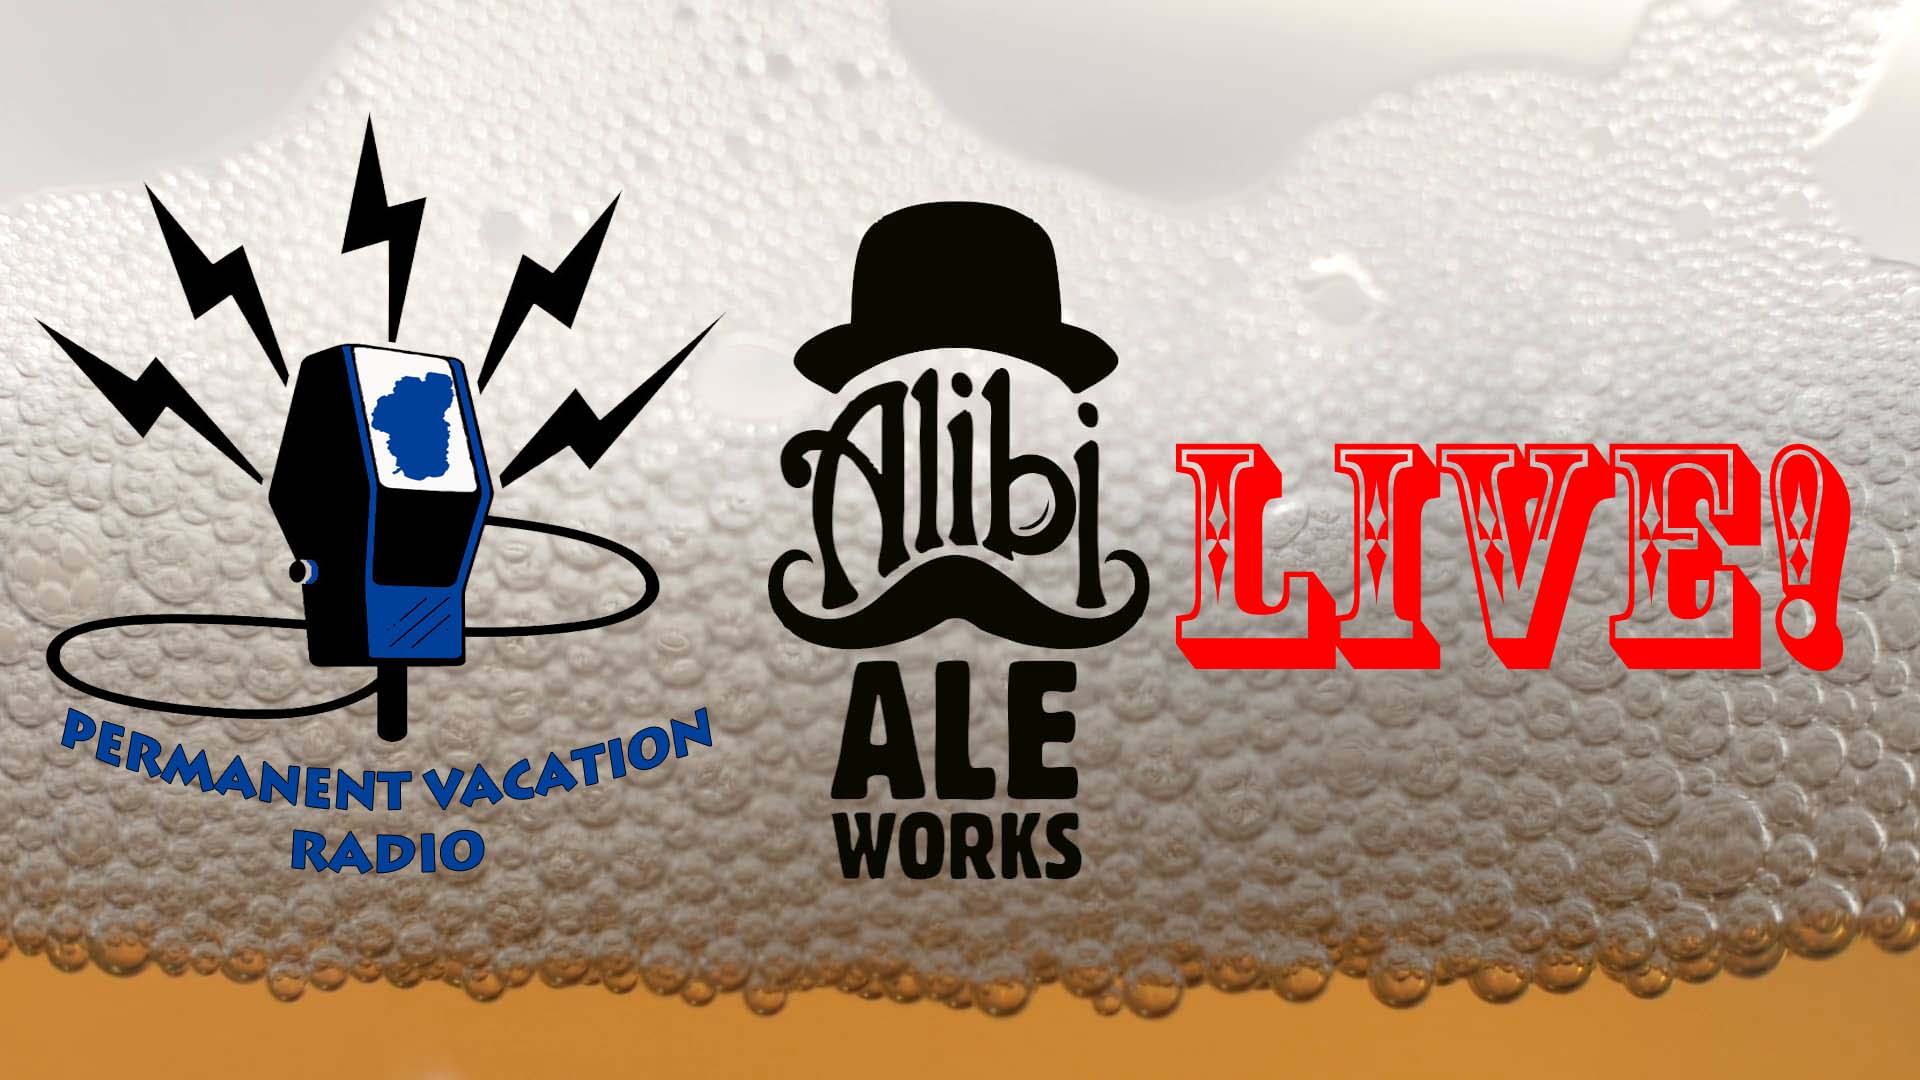 EPISODE 013 2/20/2017 LIVE from Alibi Ale Works!